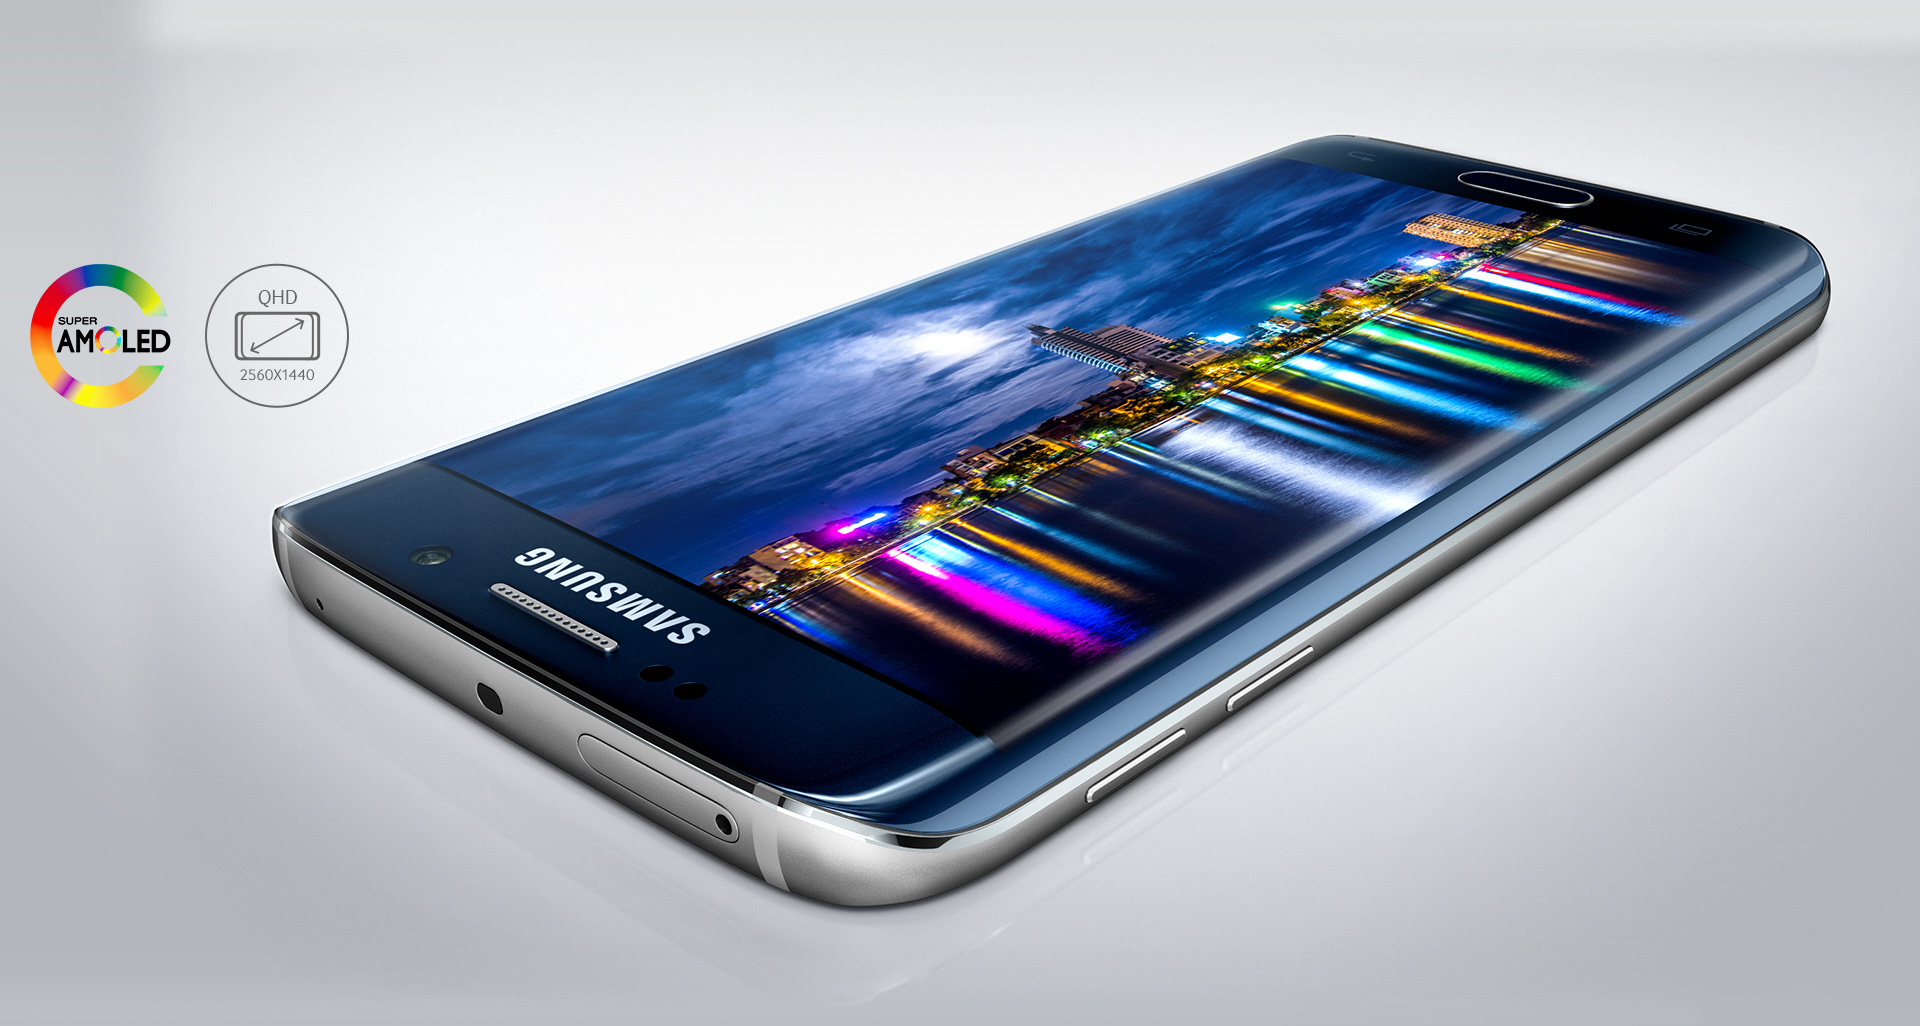 Samsung S6 Edge Plus to feature 4 GB of and Exynos 7420 NotebookCheck.net News